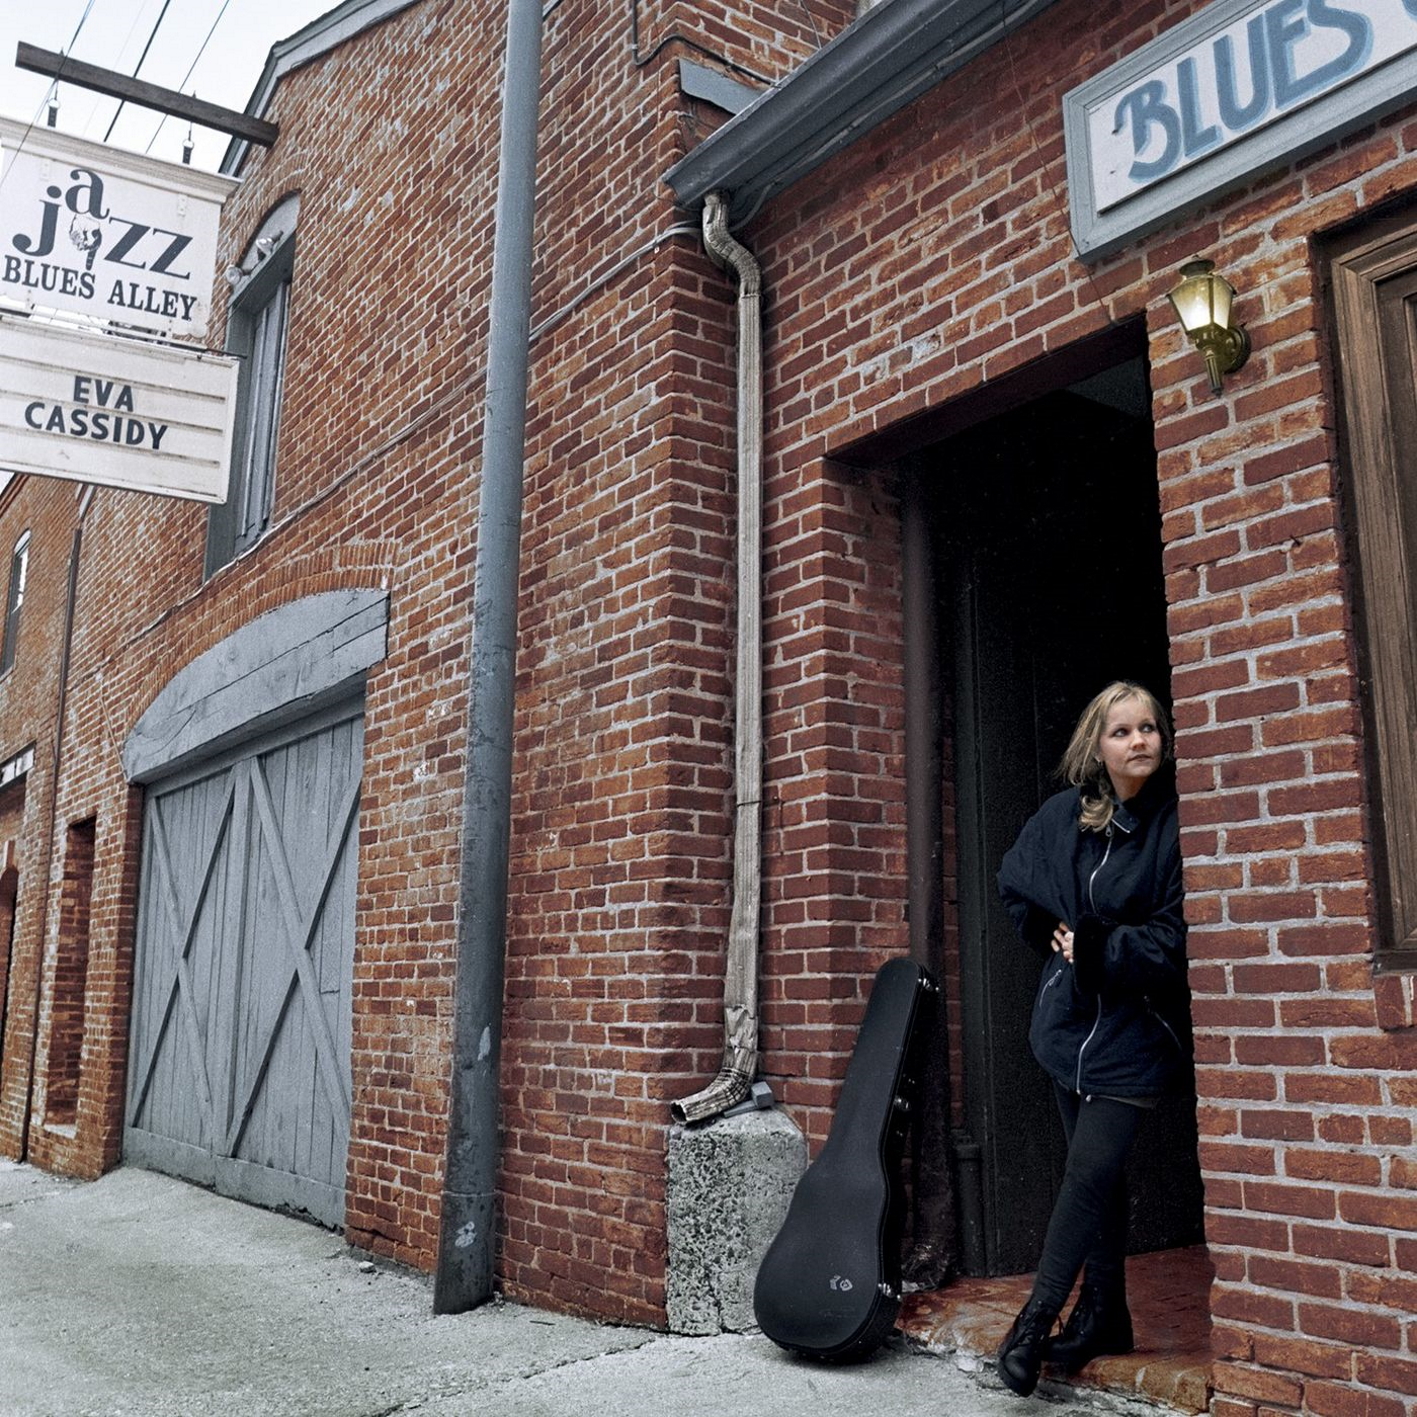 Eva Cassidy – Live at Blues Alley (25th Anniversary Edition)